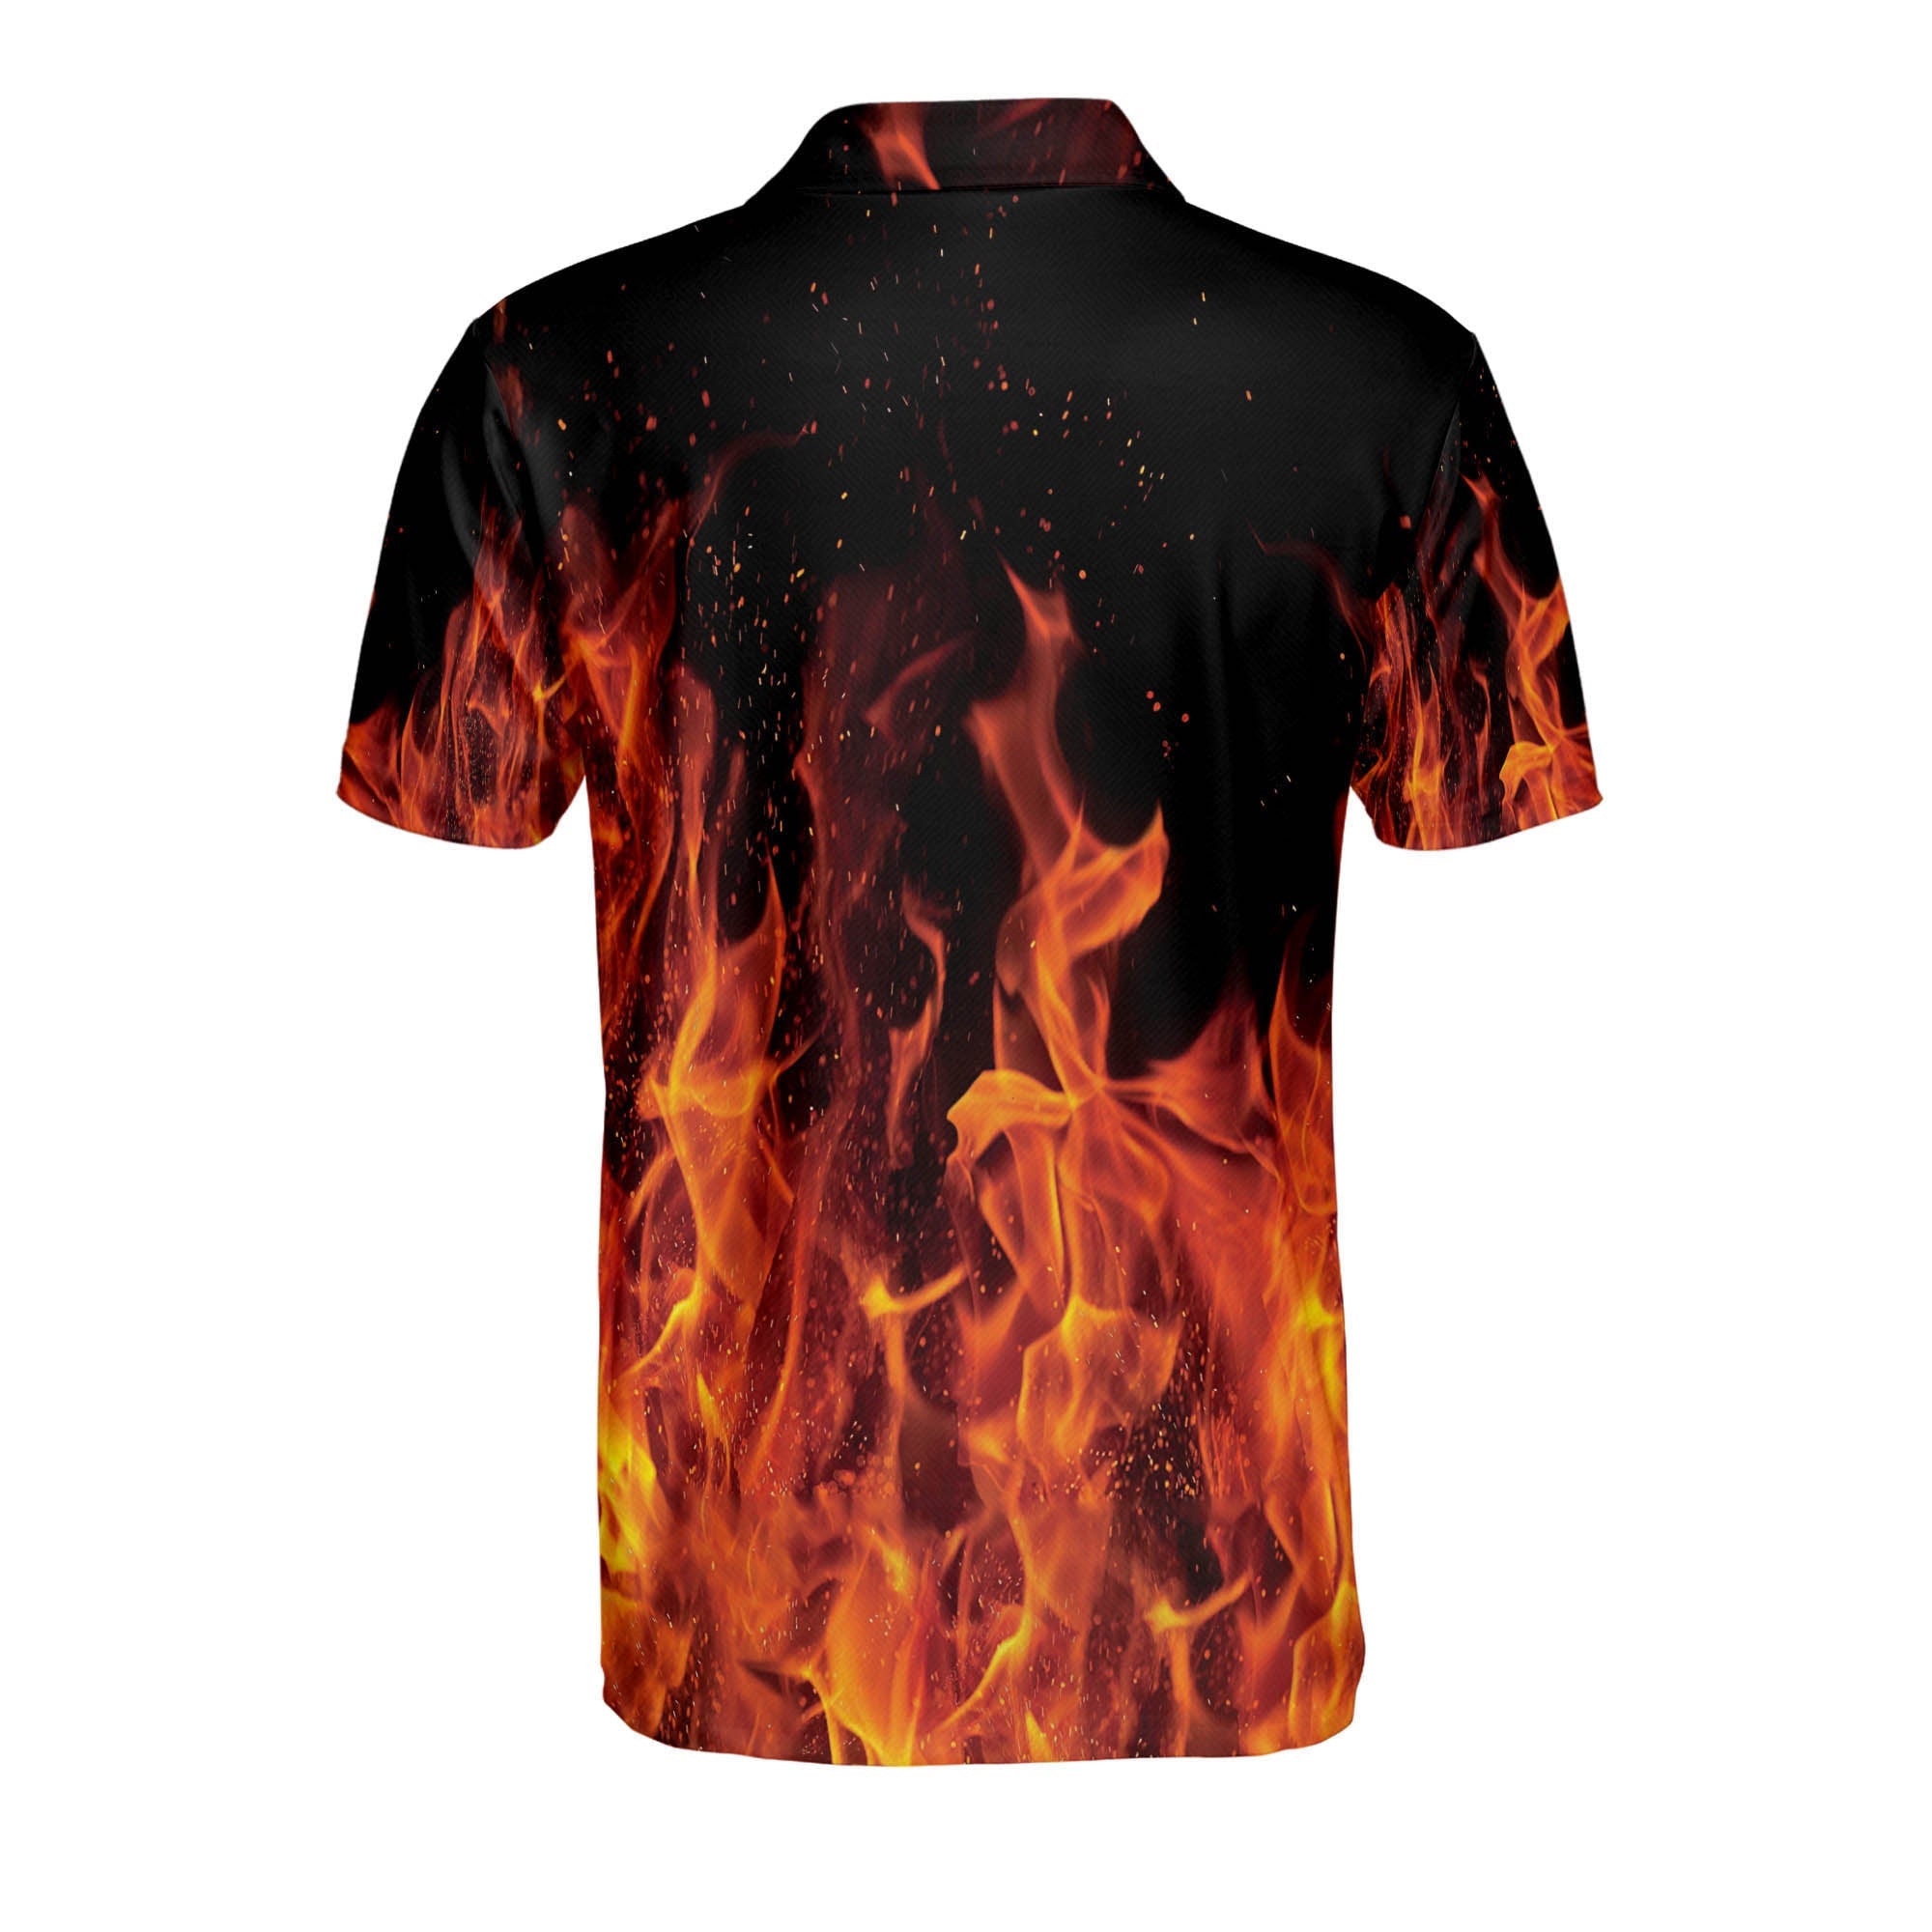 American Eagle Fiery Cool Polo Shirt/ Fire Pattern Full Printed Shirt/ Gift for Men